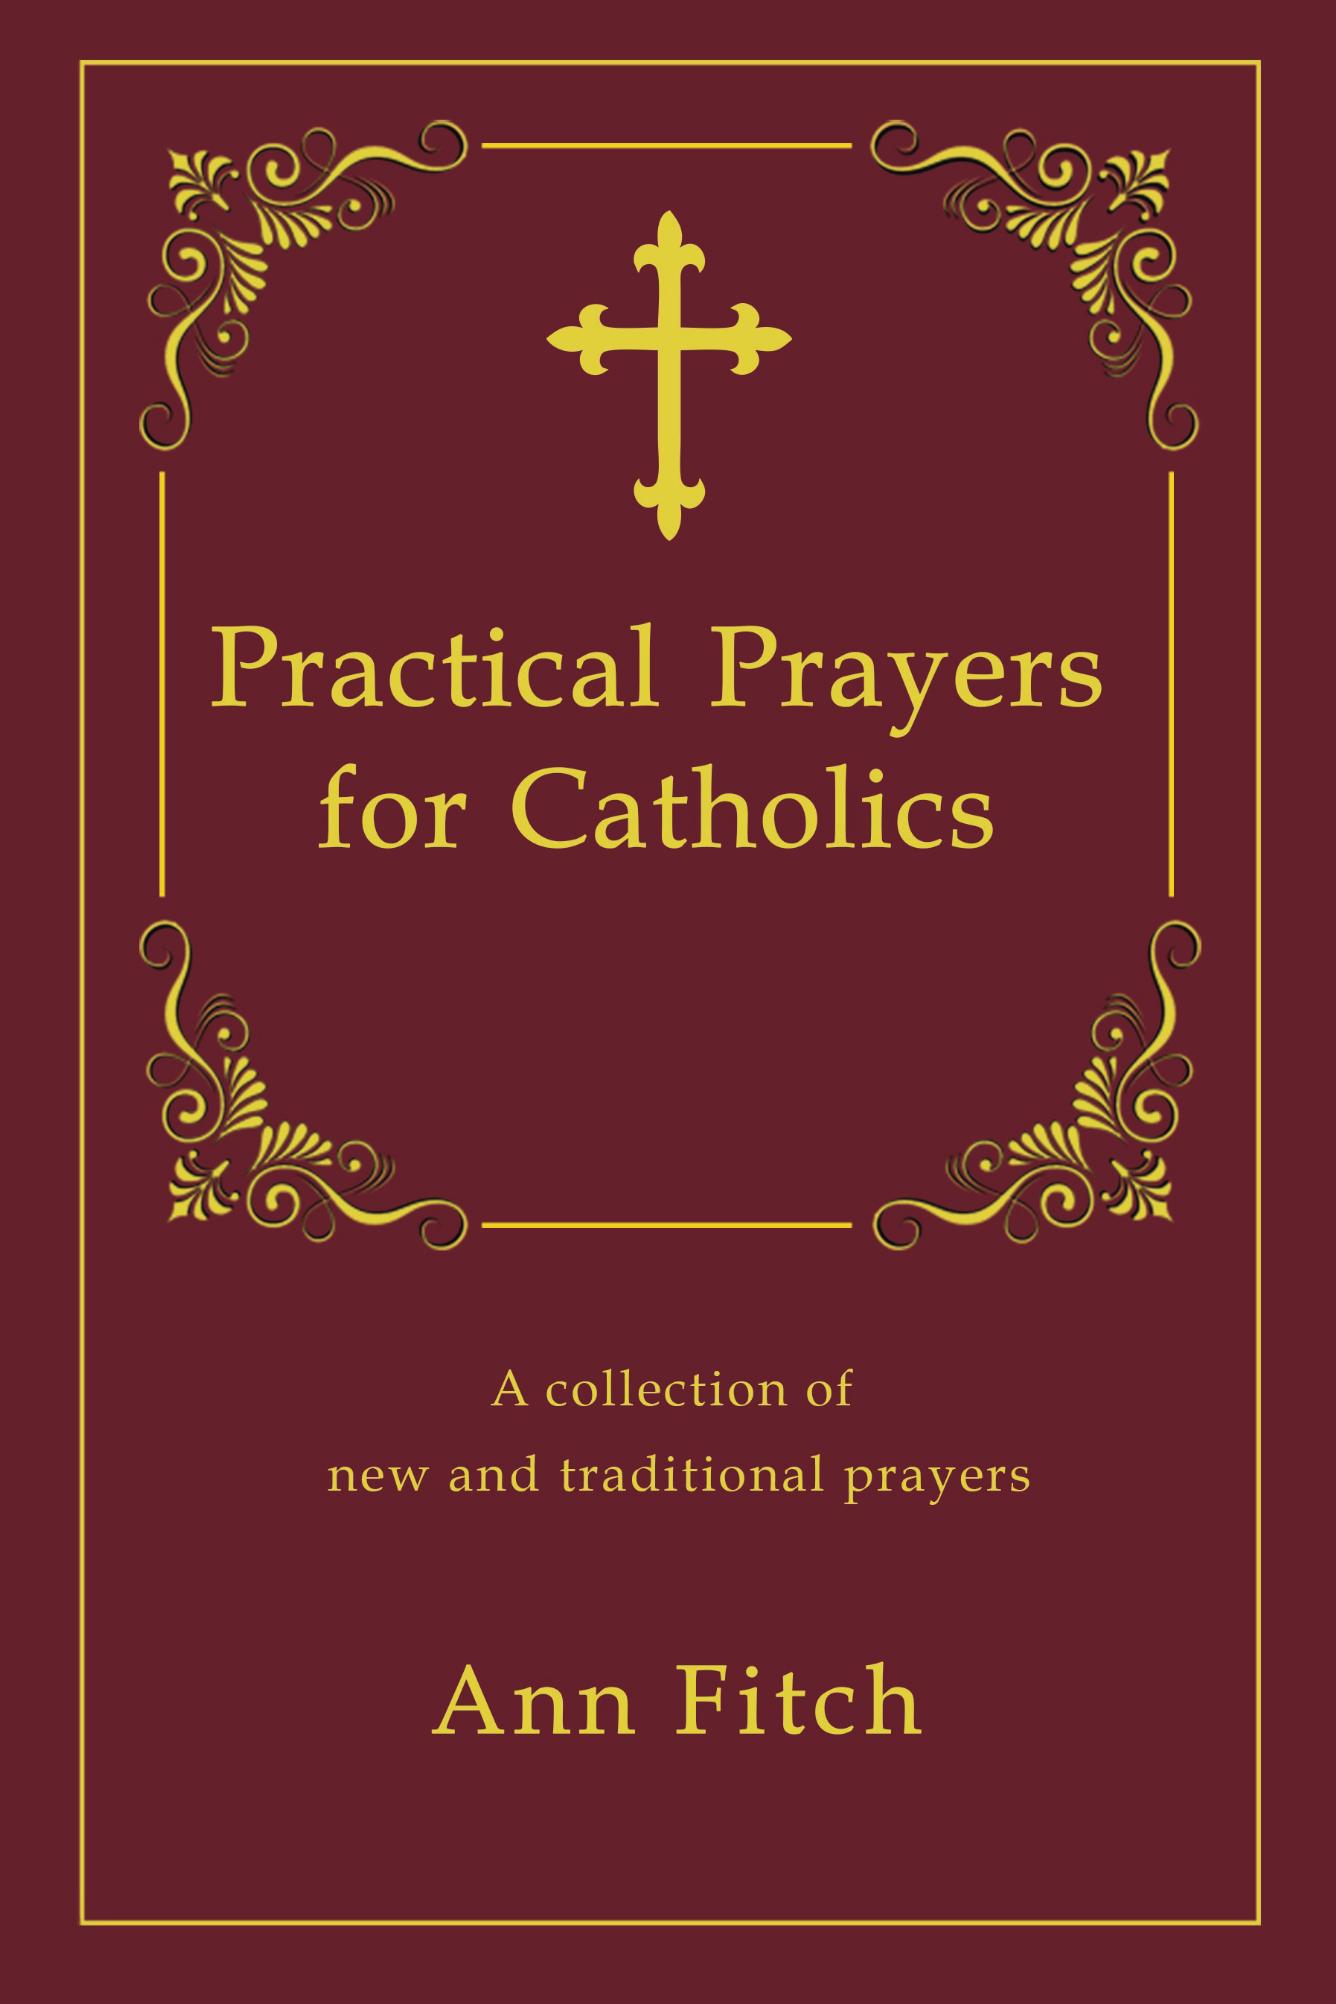 Practical Prayers for Catholics - book cover